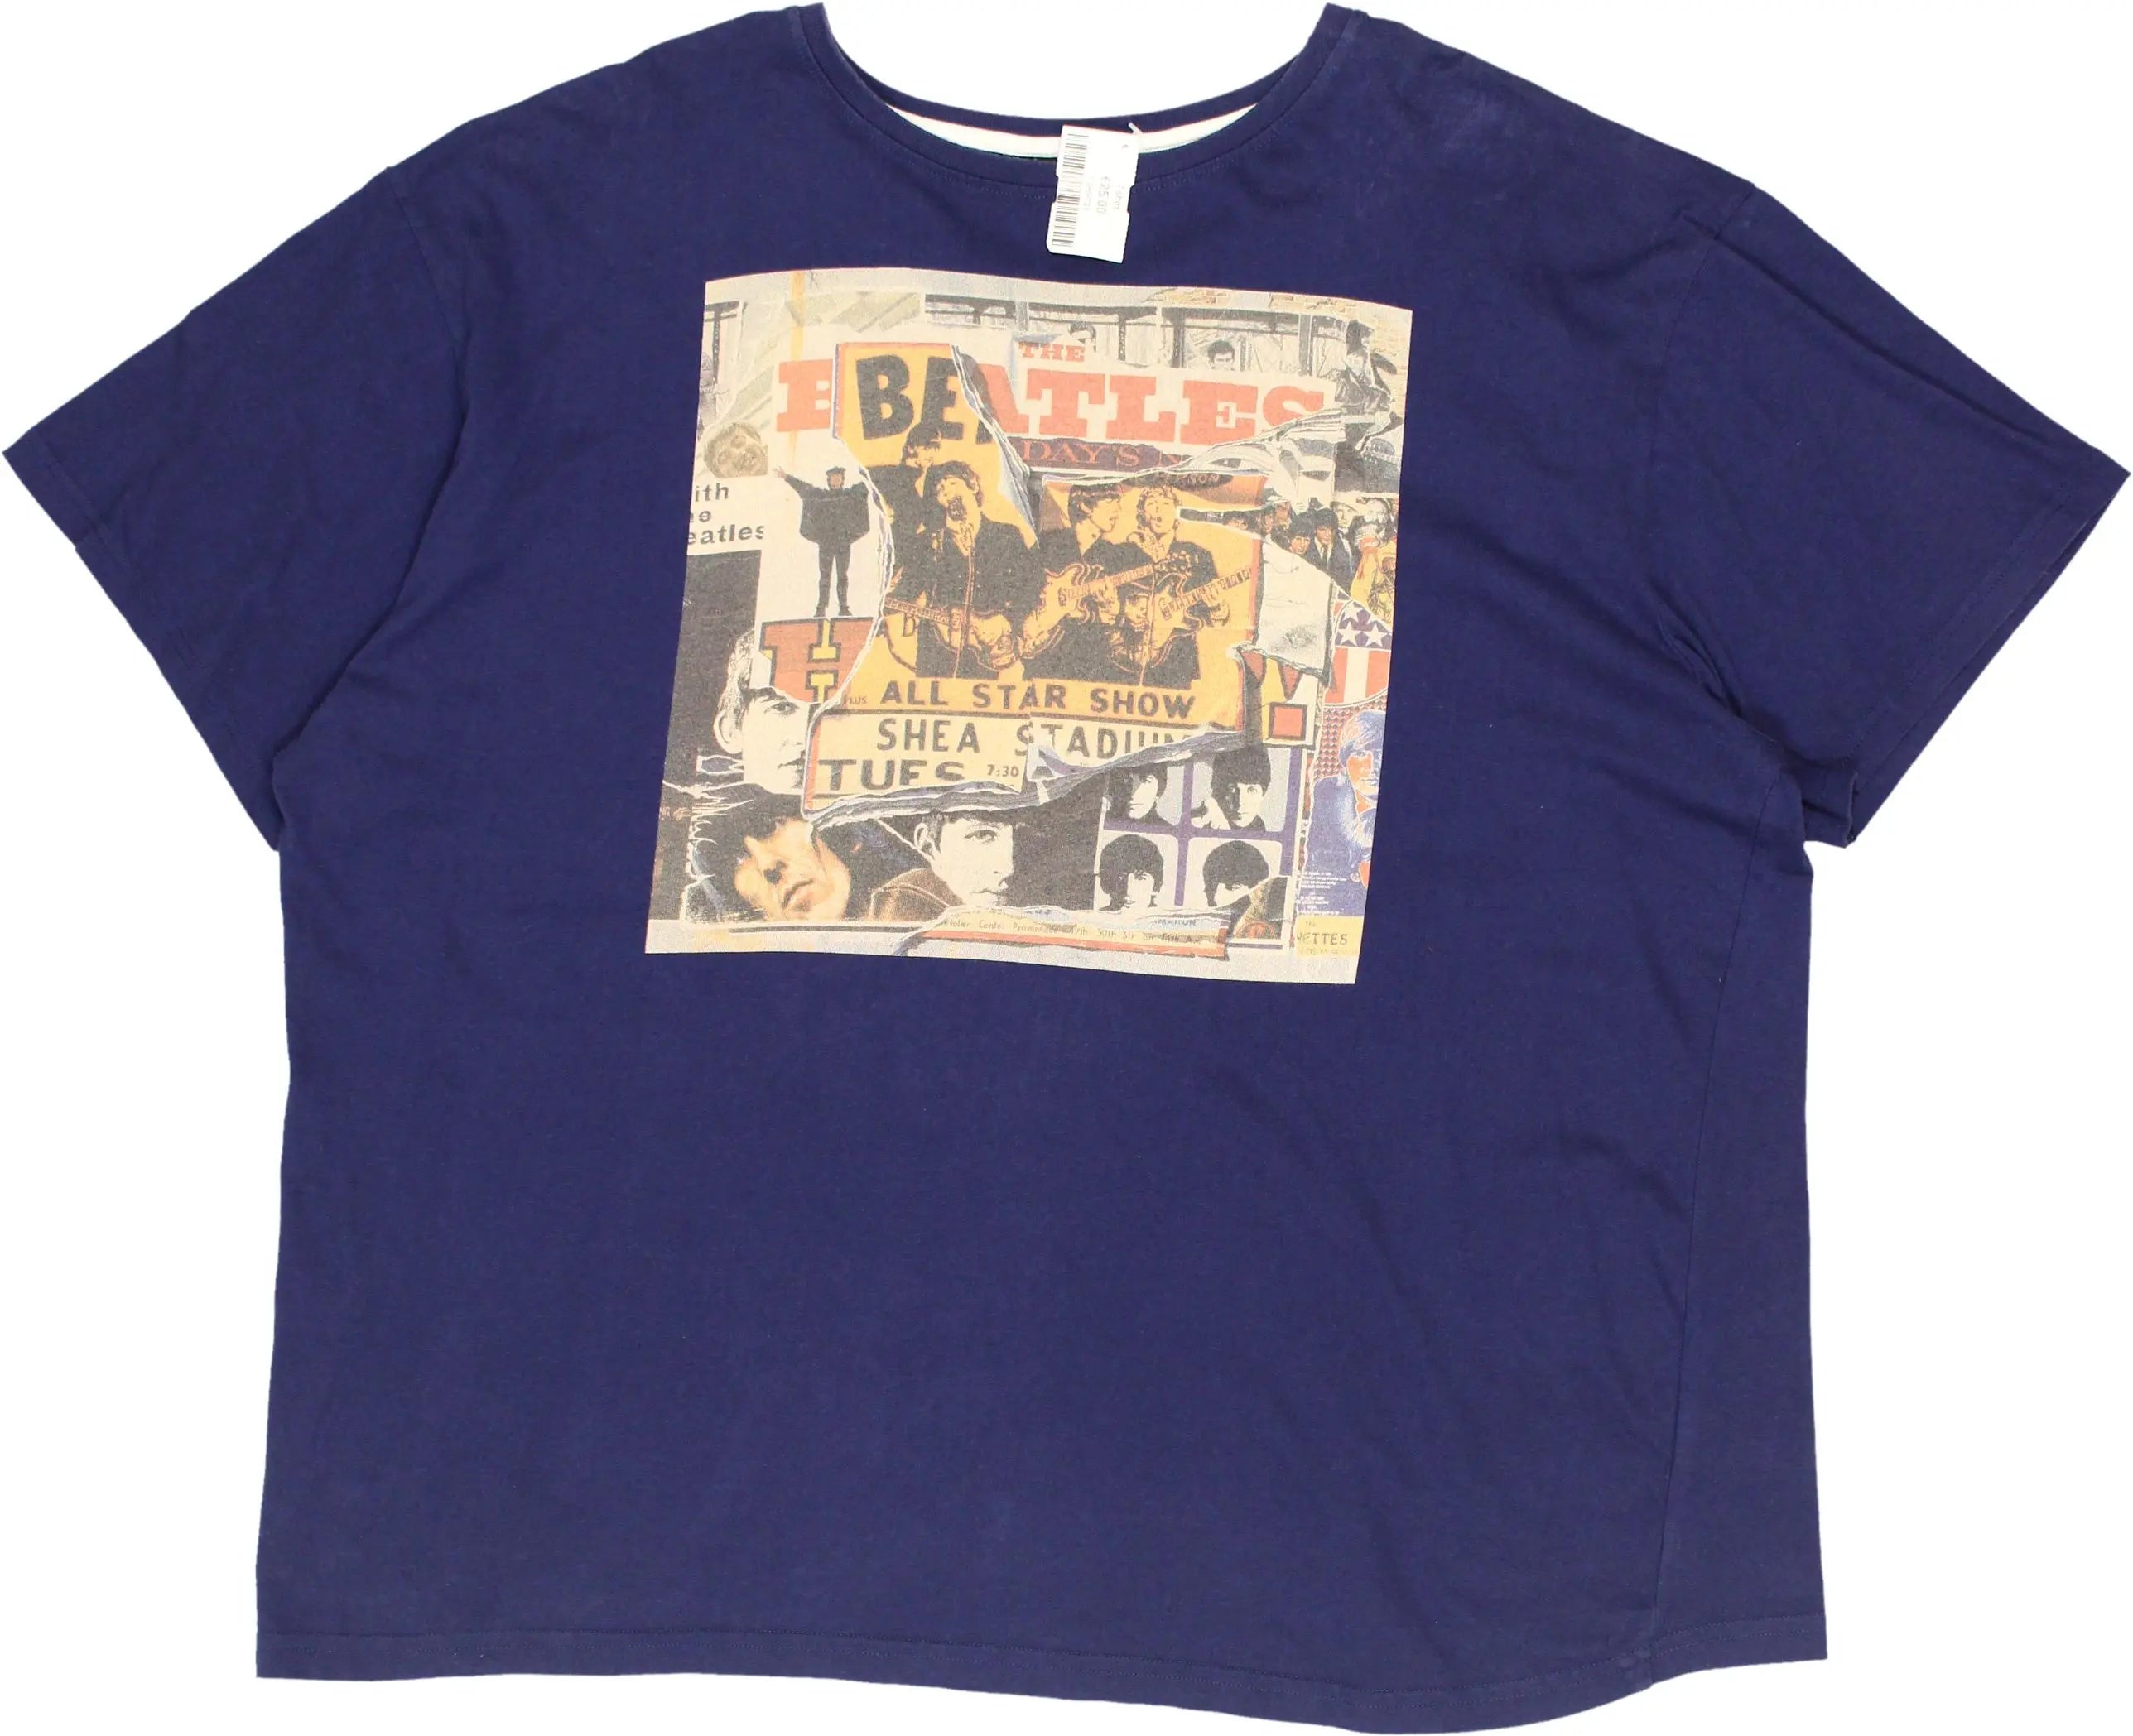 Replika Jeans - The Beatles T-shirt- ThriftTale.com - Vintage and second handclothing